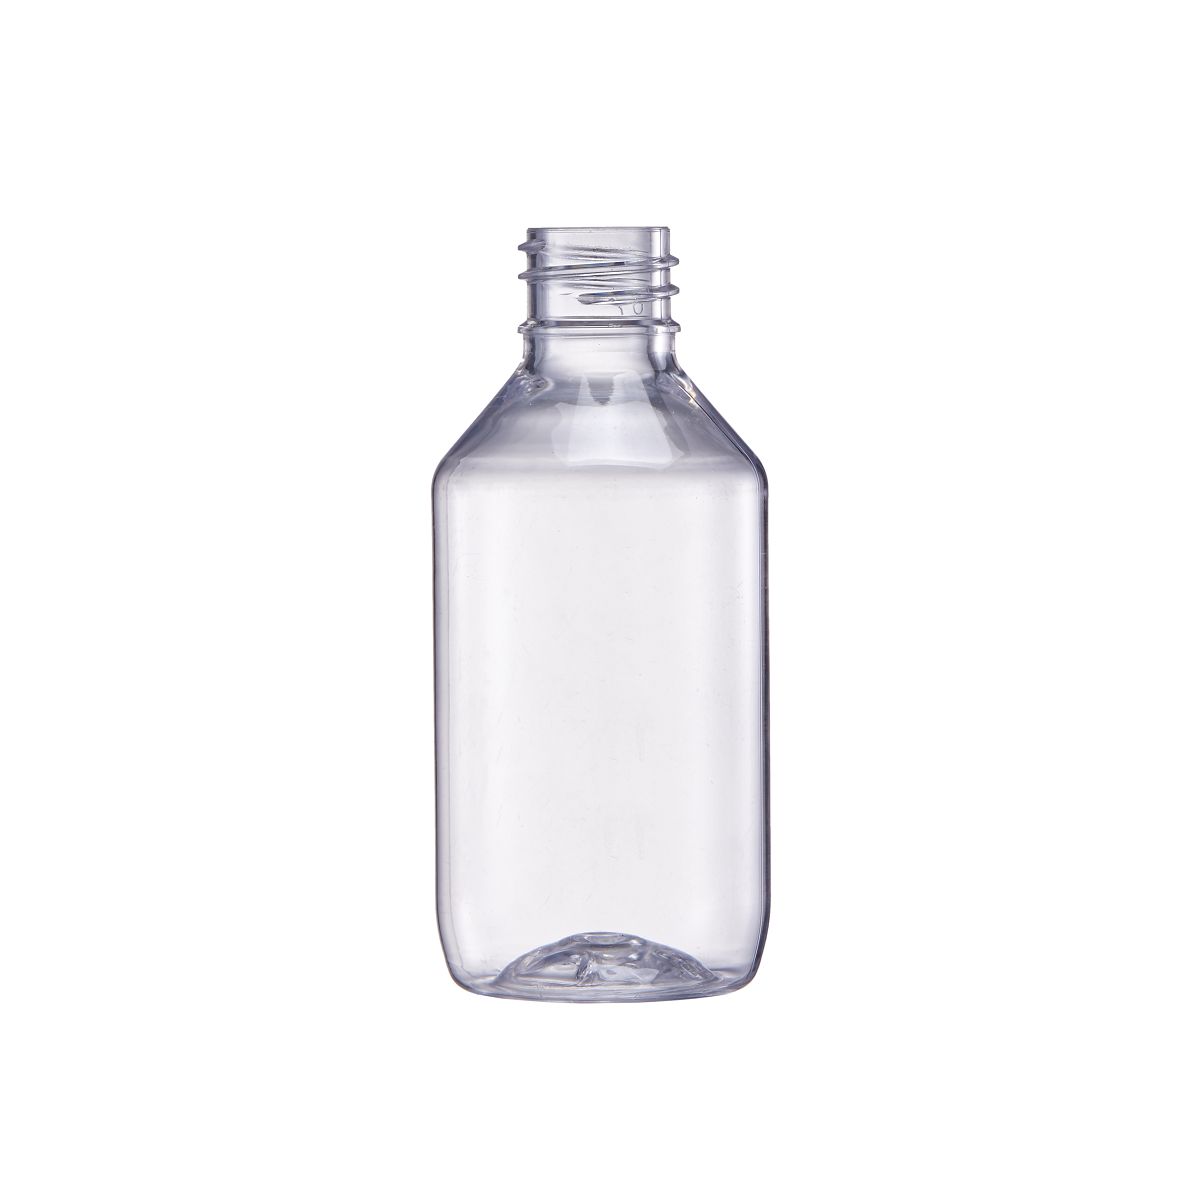 Insect Repellent Bottle